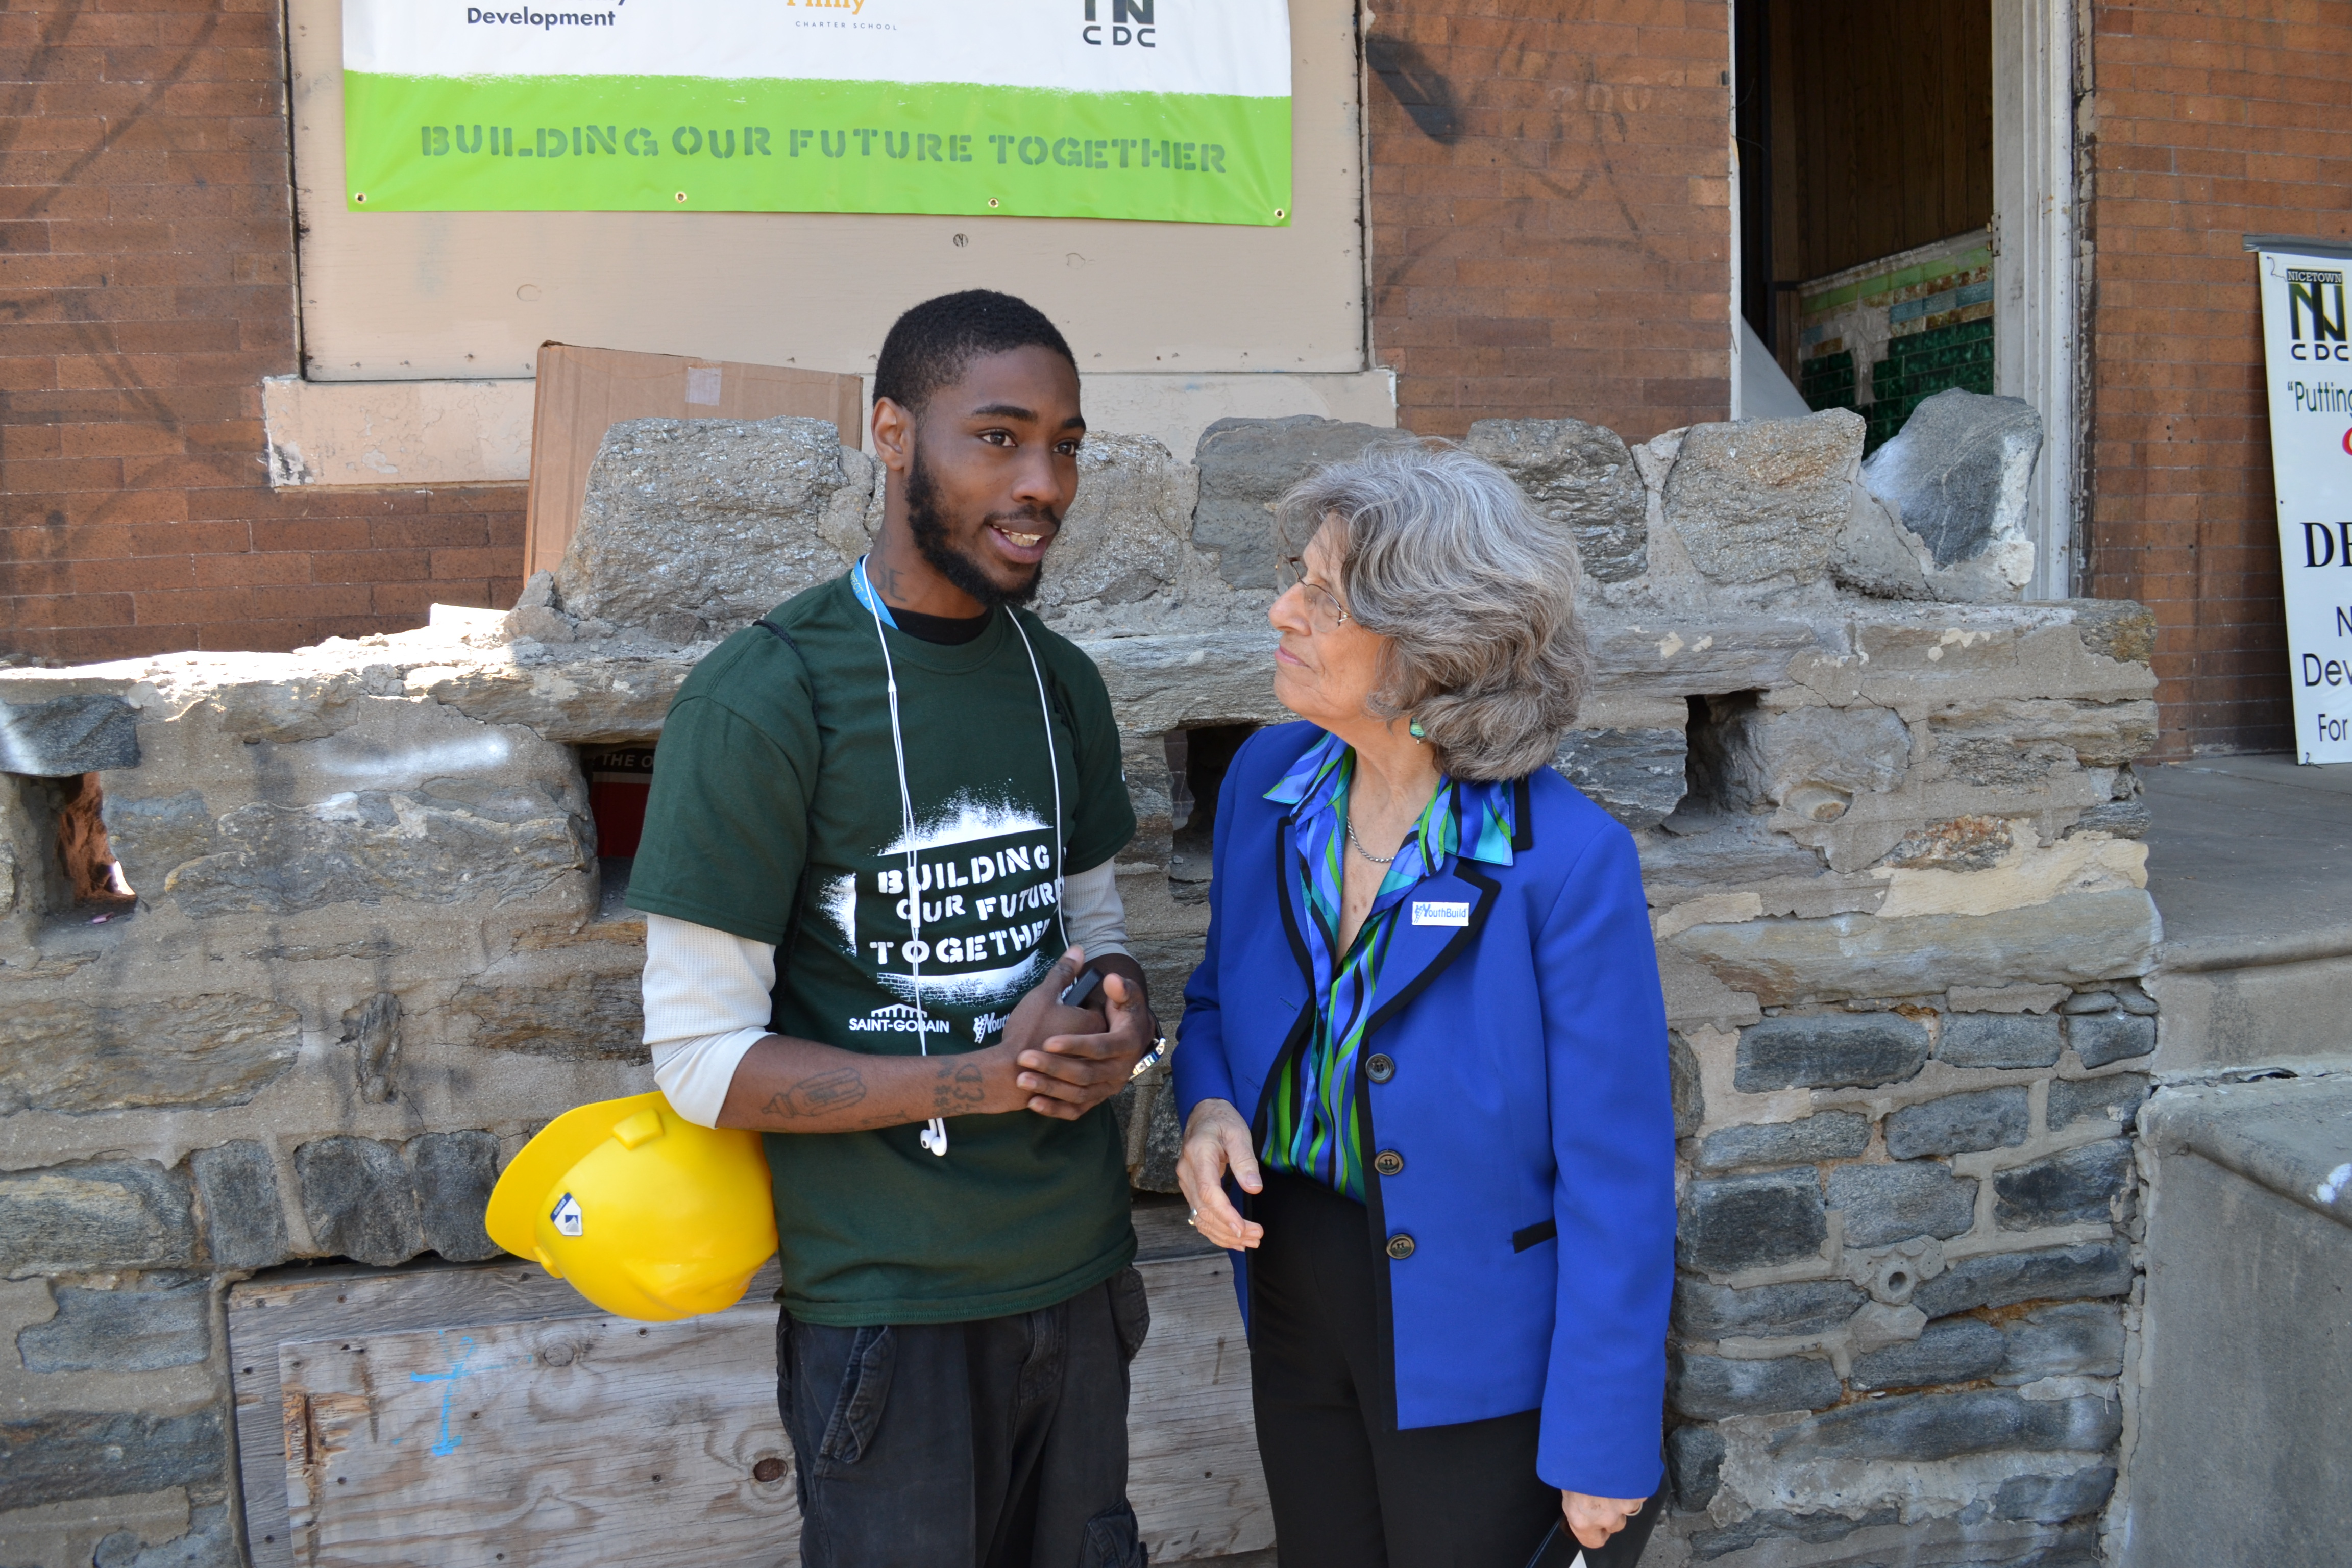 YouthBuild USA CEO and founder Dorothy Stoneman spoke with all of the YouthBuild Philadelphia students